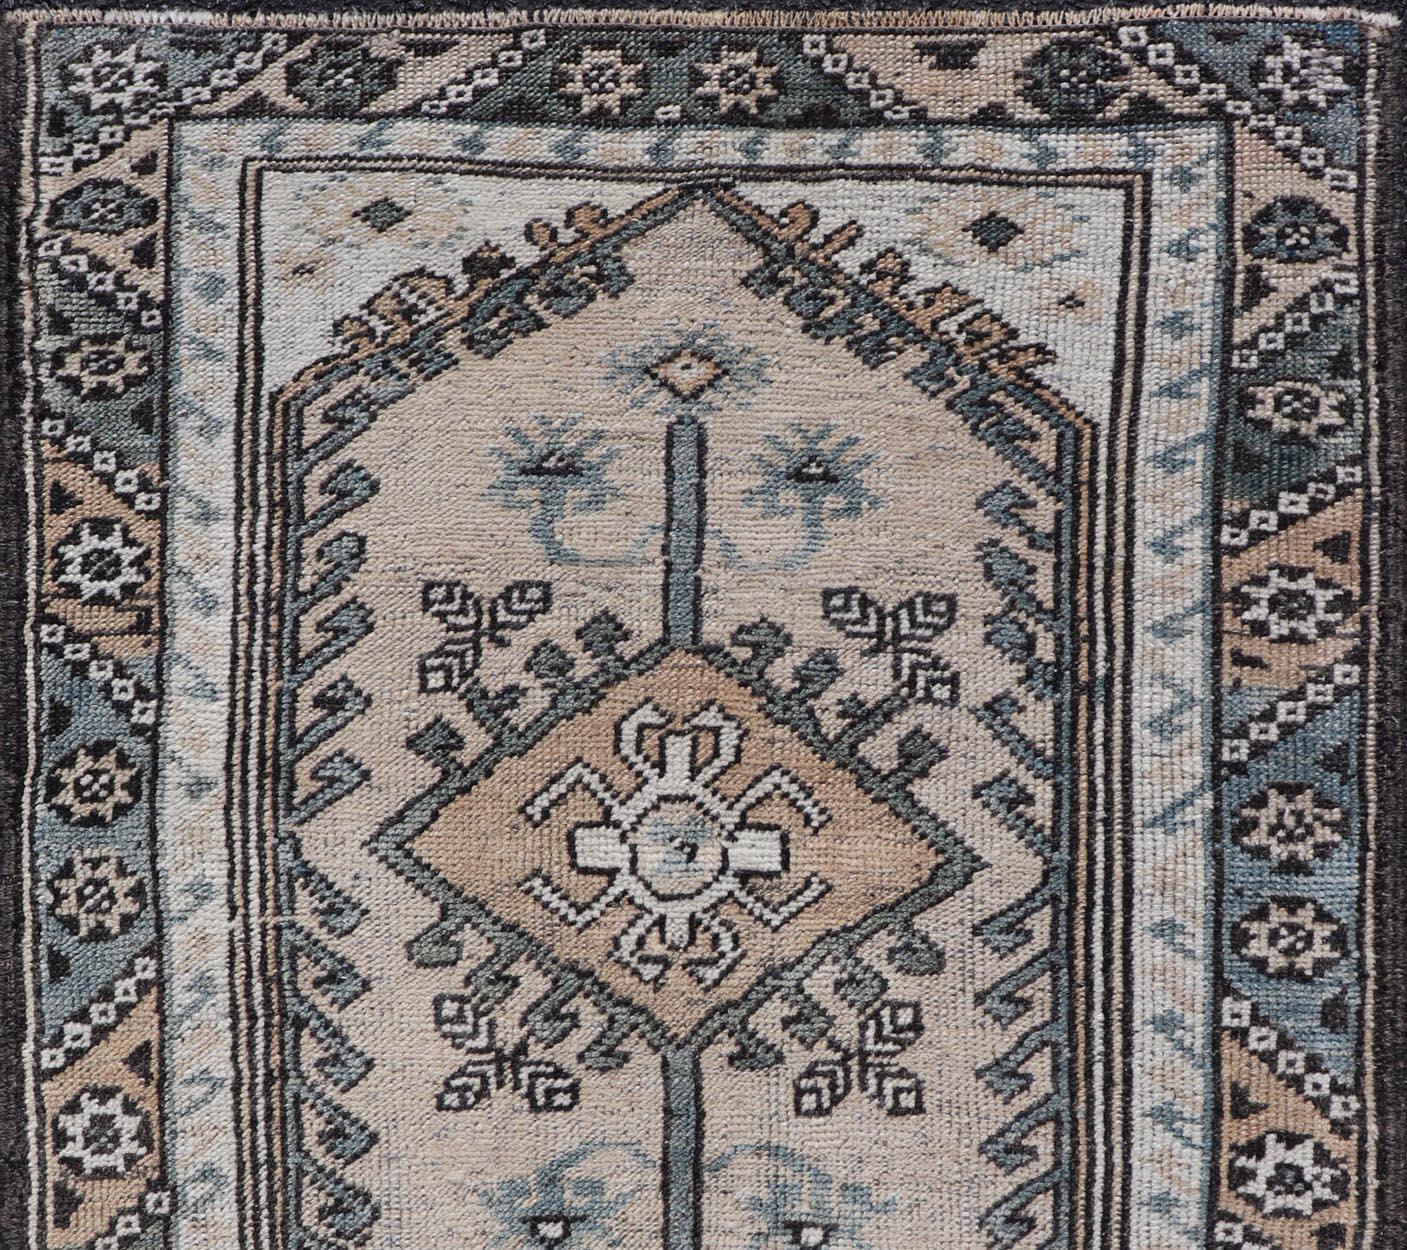 Hand-Knotted Vintage Turkish Medallion Oushak Area Rug in Various Blue, Taupe, Brown & Cream